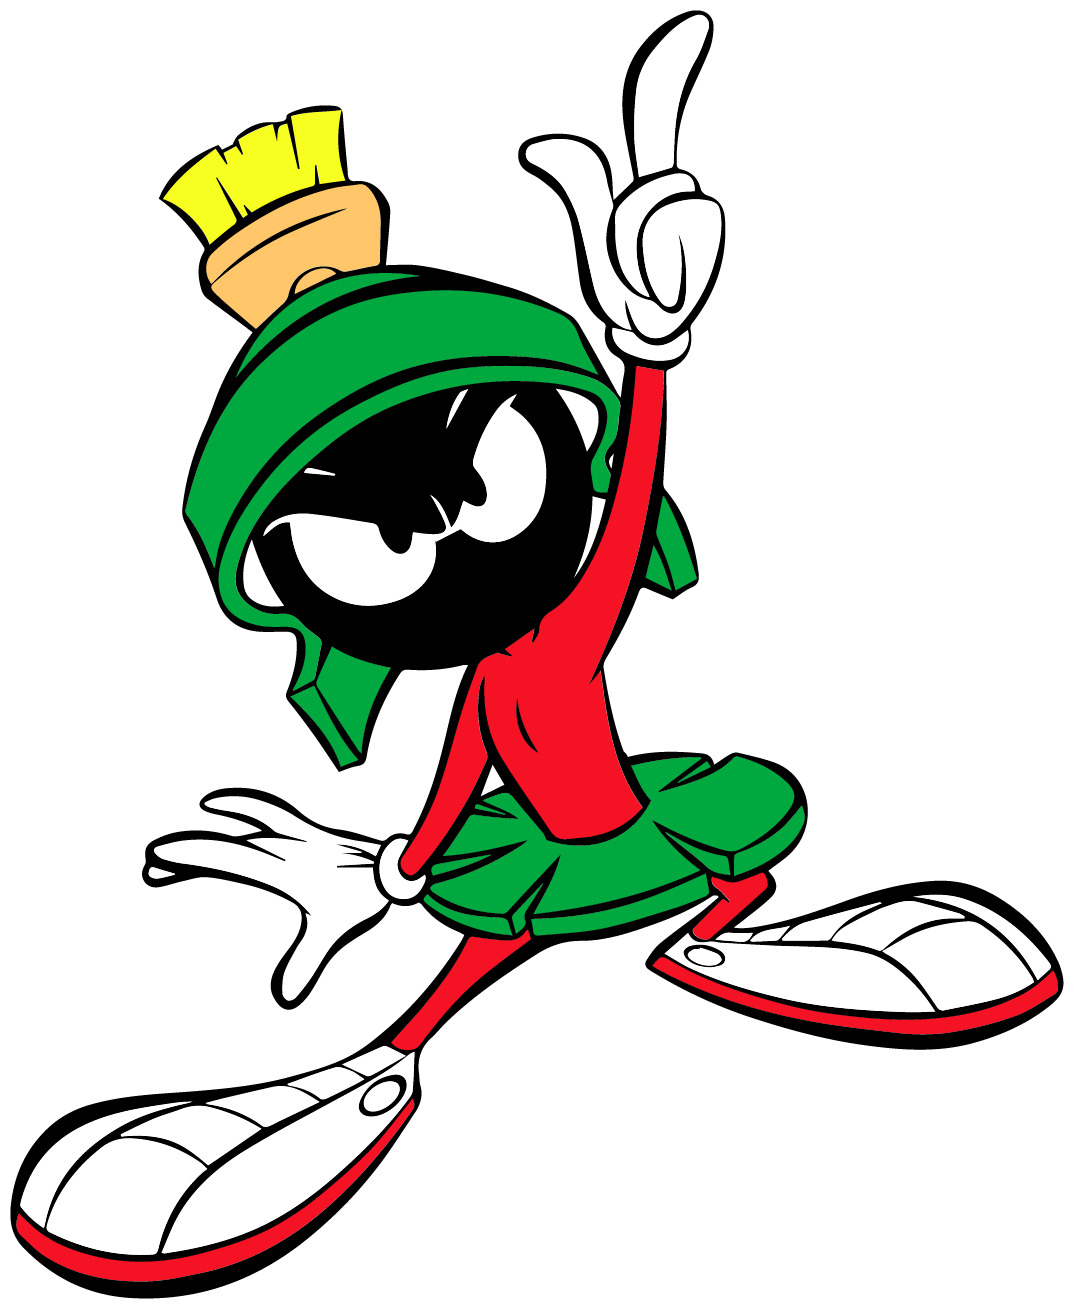 Marvin the Martian Diabolical Sticker / Vinyl Decal  | 10 Sizes with TRACKING